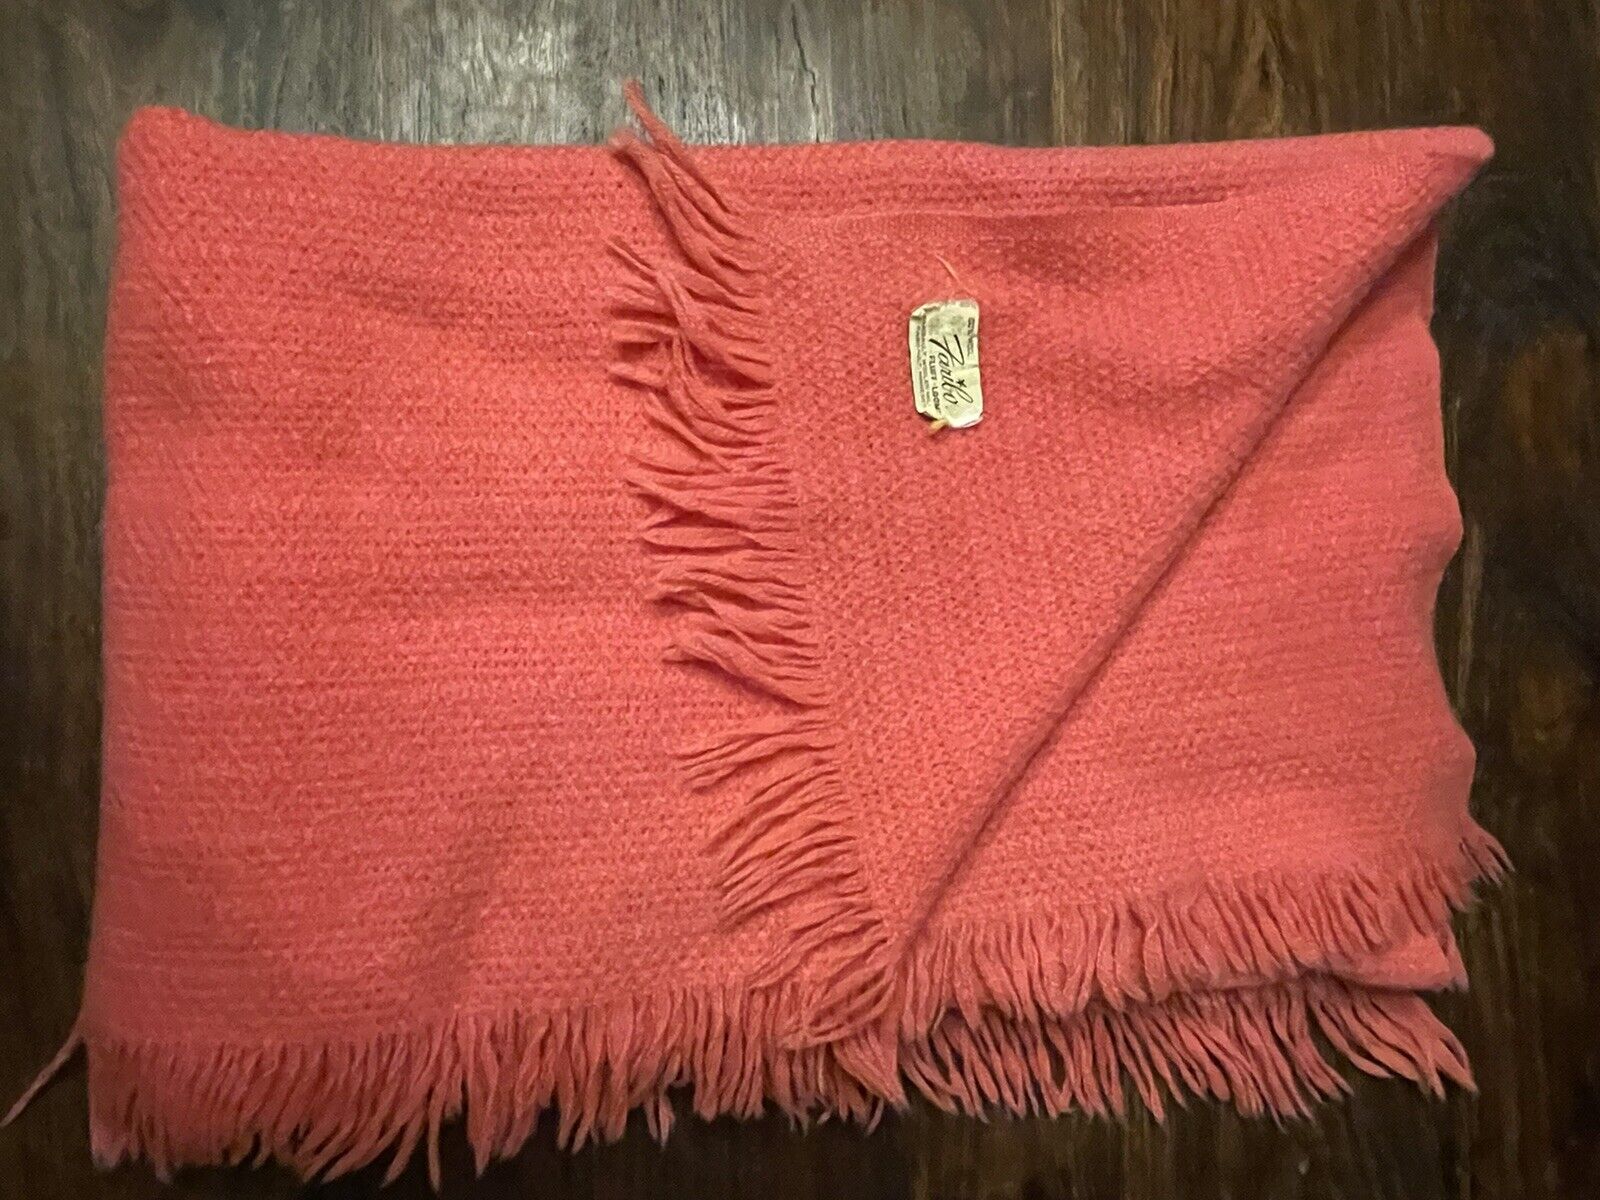 Vintage Faribo Woolen Mill Co Blanket or Throw Pink Fluff Minnesota made in USA